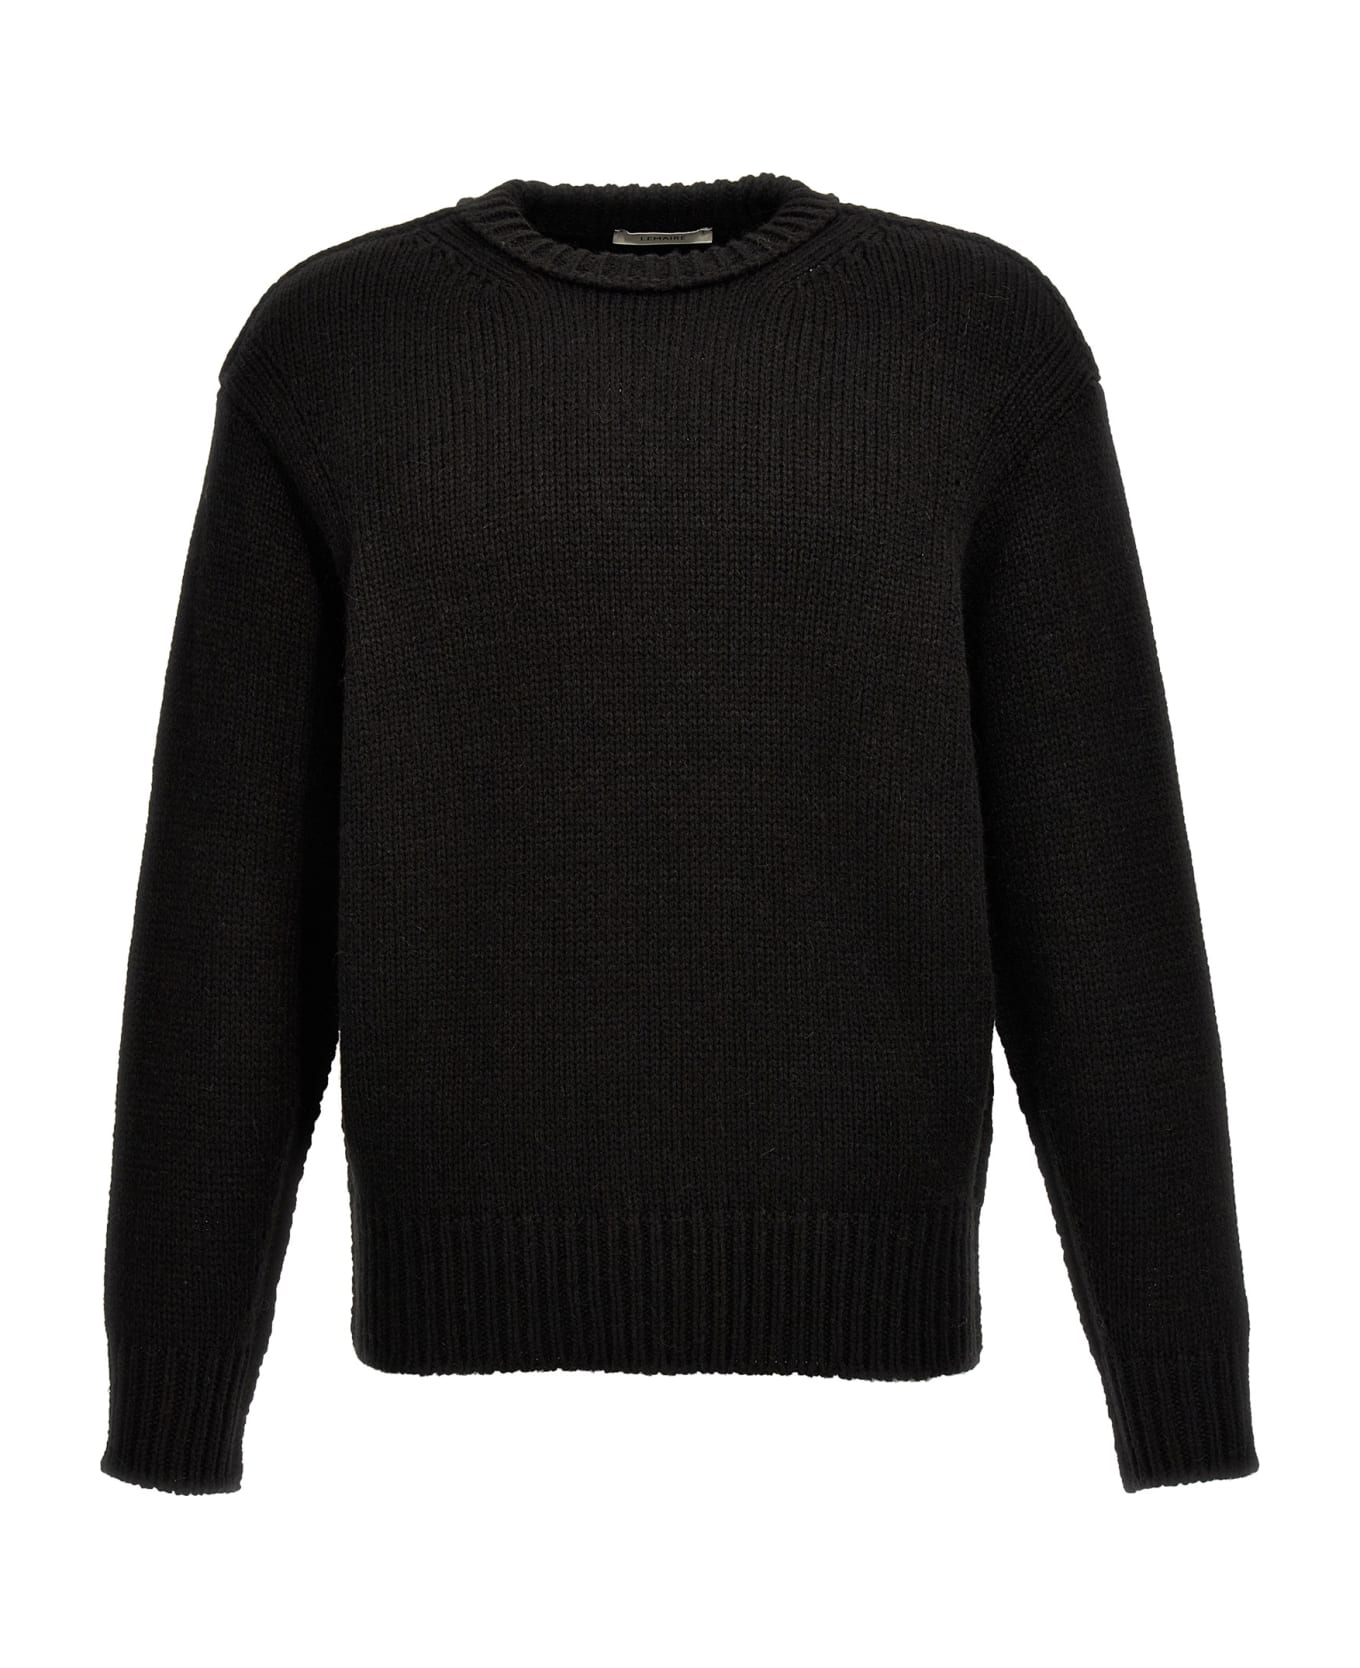 Lemaire 'boxy' Sweater - Black